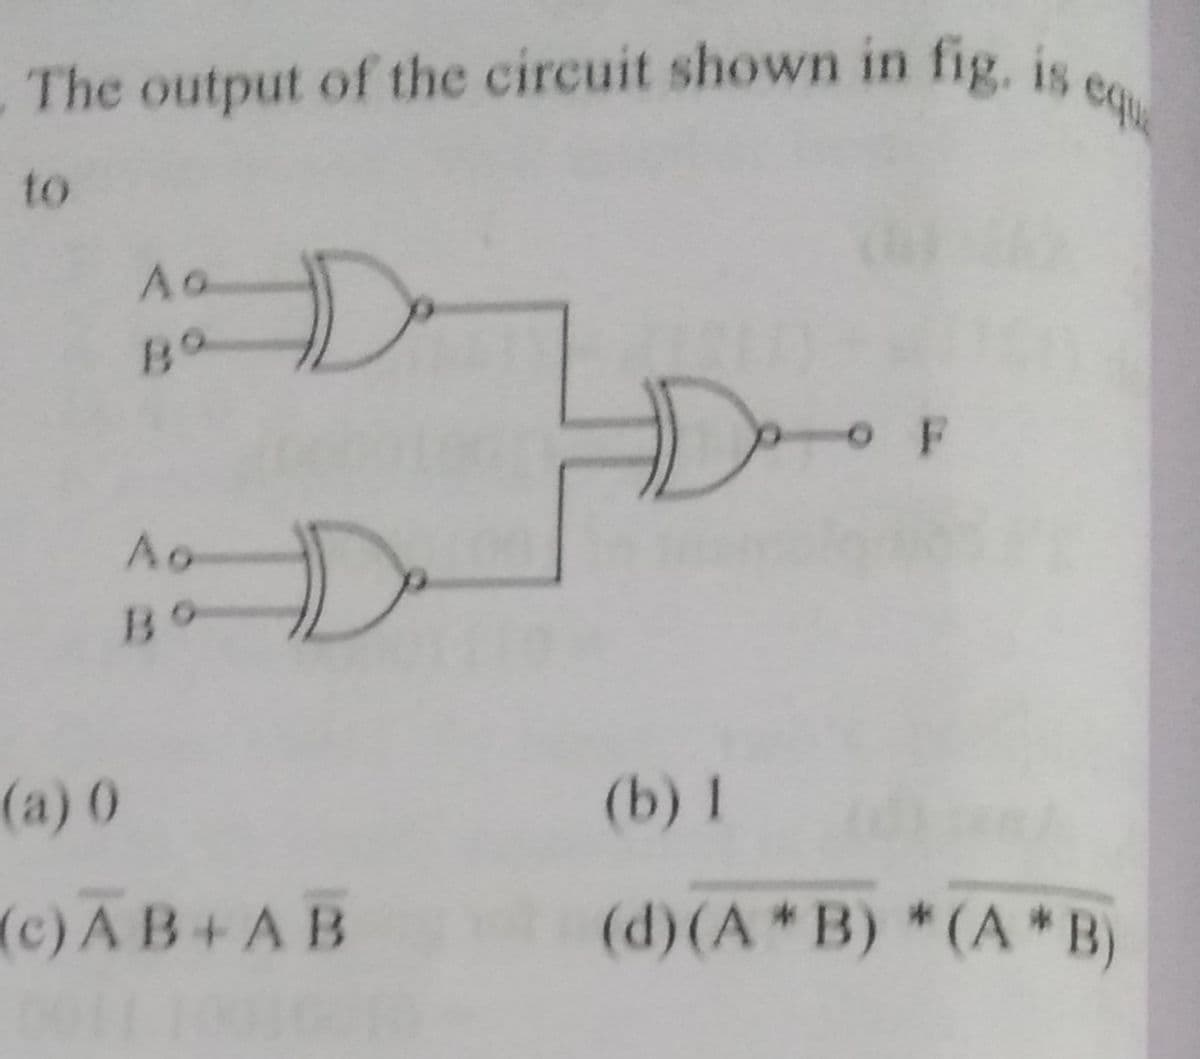 eq
The output of the circuit shown in fig, is
to
Ao
HD-
O F
Ao
Bo
(a) ()
(b) 1
(c) AB+AB
(d) (A*B) *(A* B)
